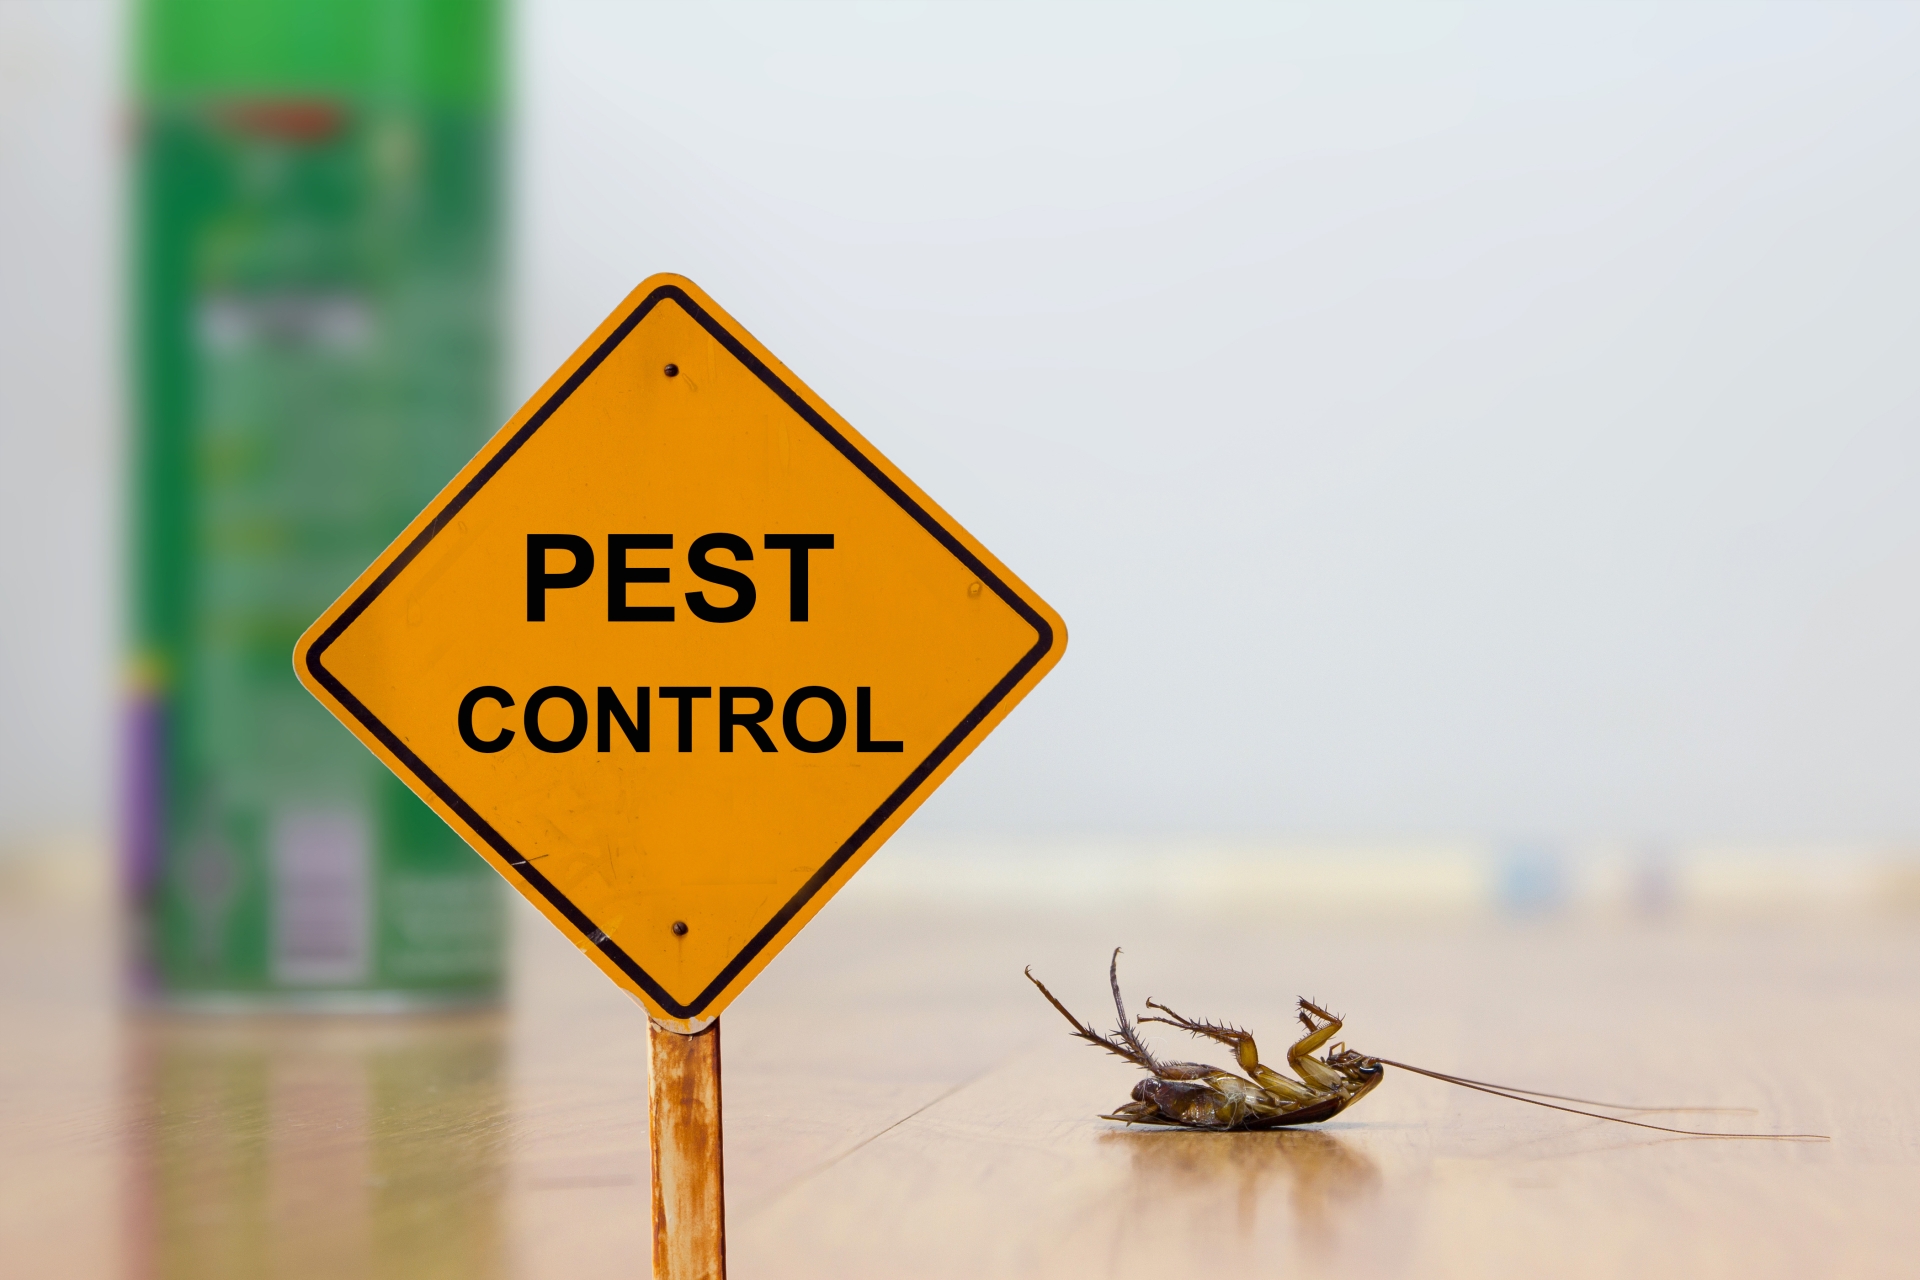 24 Hour Pest Control, Pest Control in Forest Gate, Upton Park, E7. Call Now 020 8166 9746